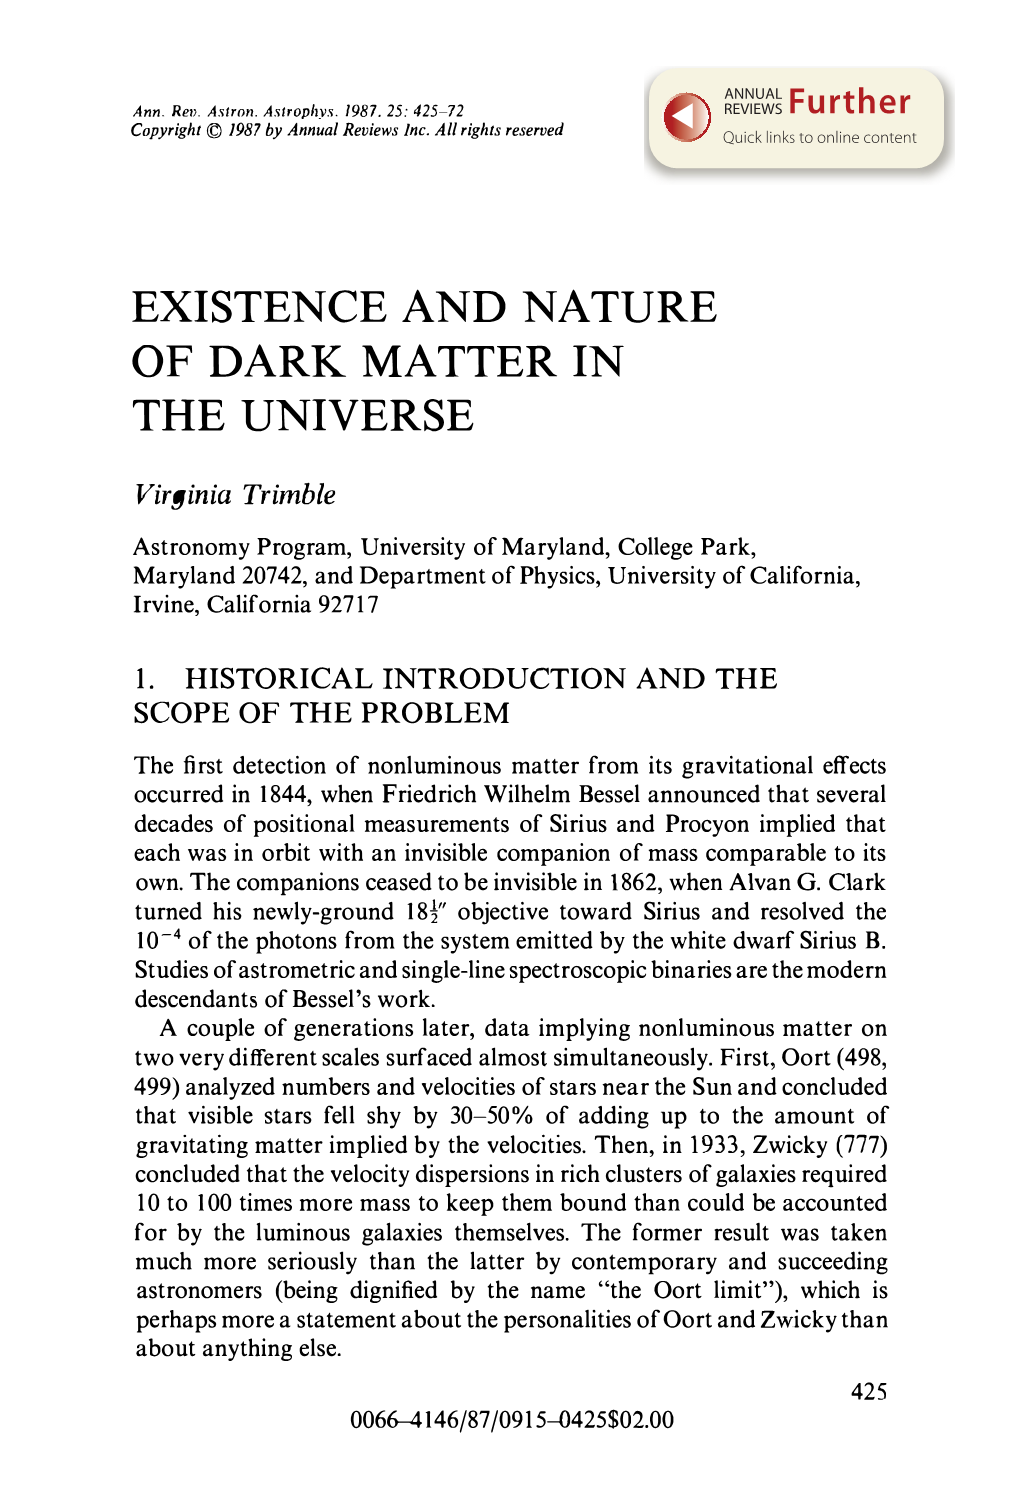 Existence and Nature of Dark Matter in the Universe